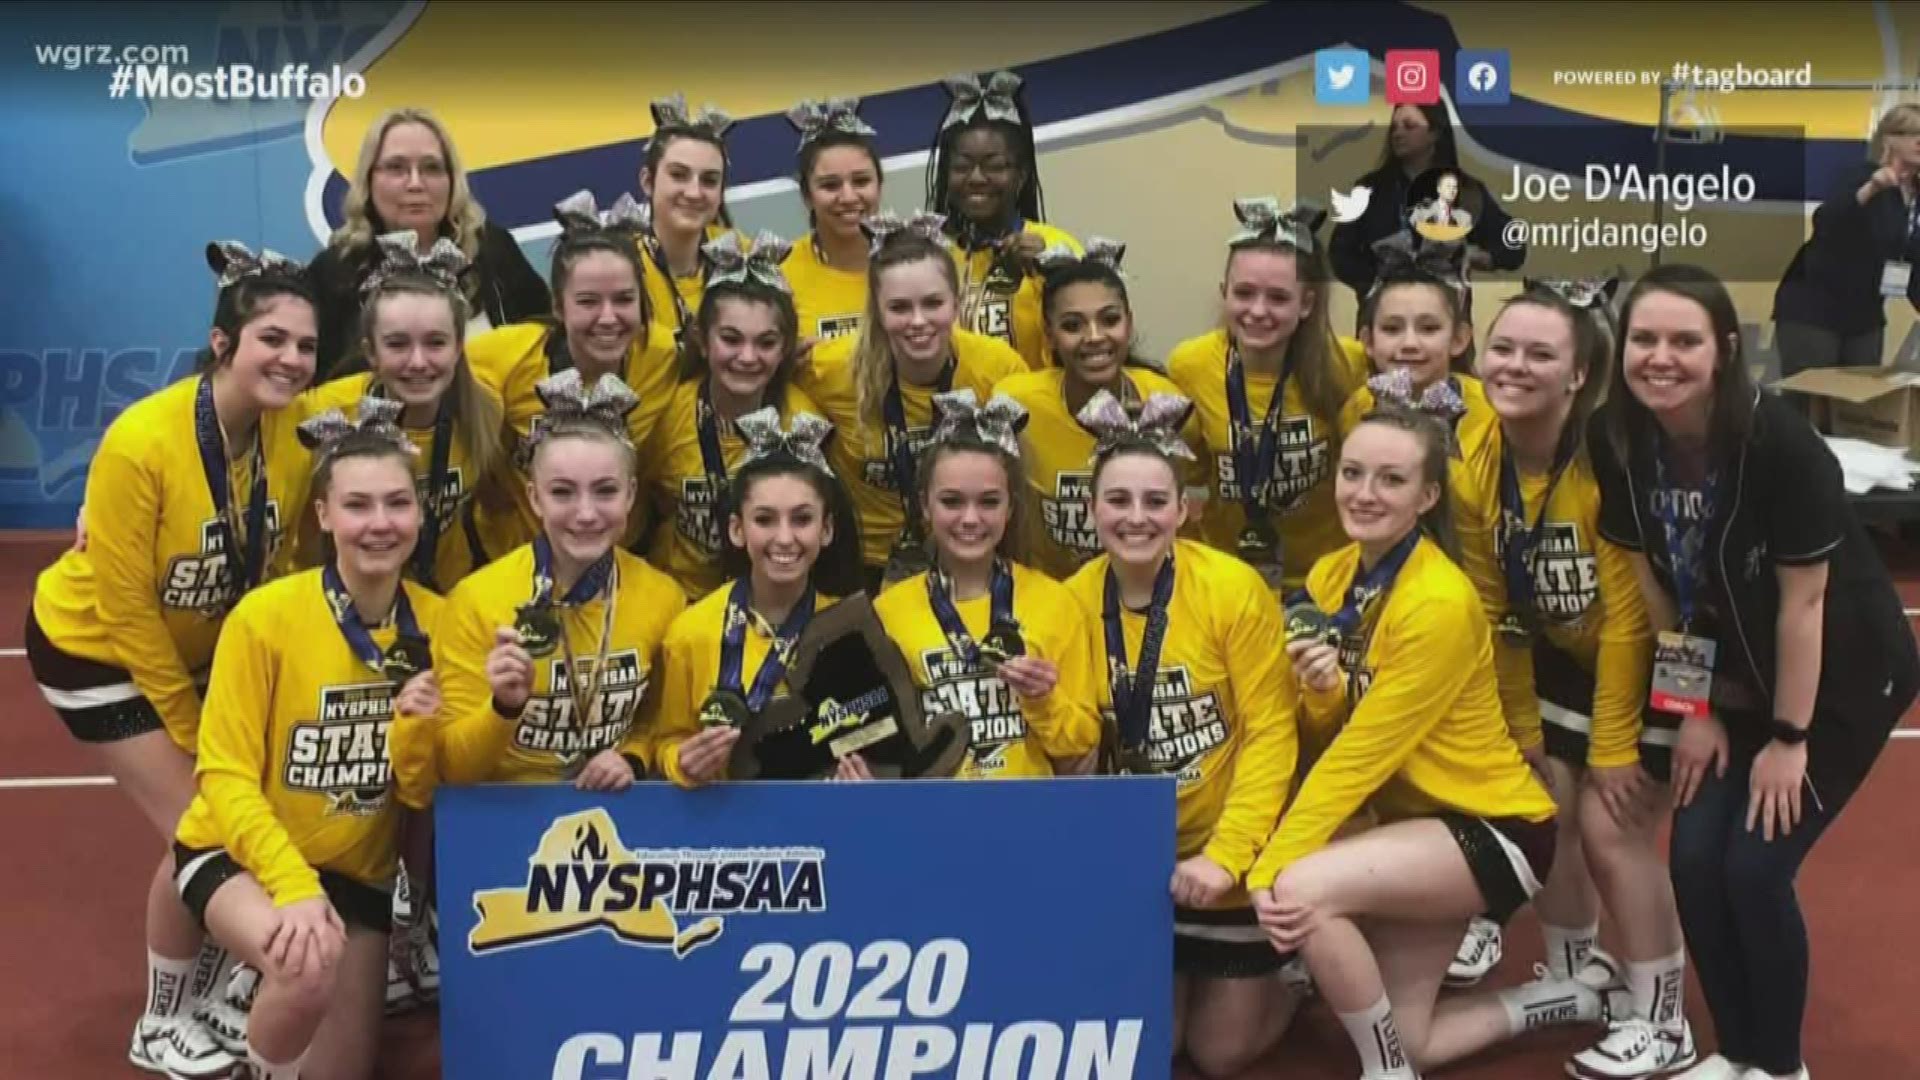 Congratulations to Maryvale High School's cheerleading team who won the 2020 small division state championship.